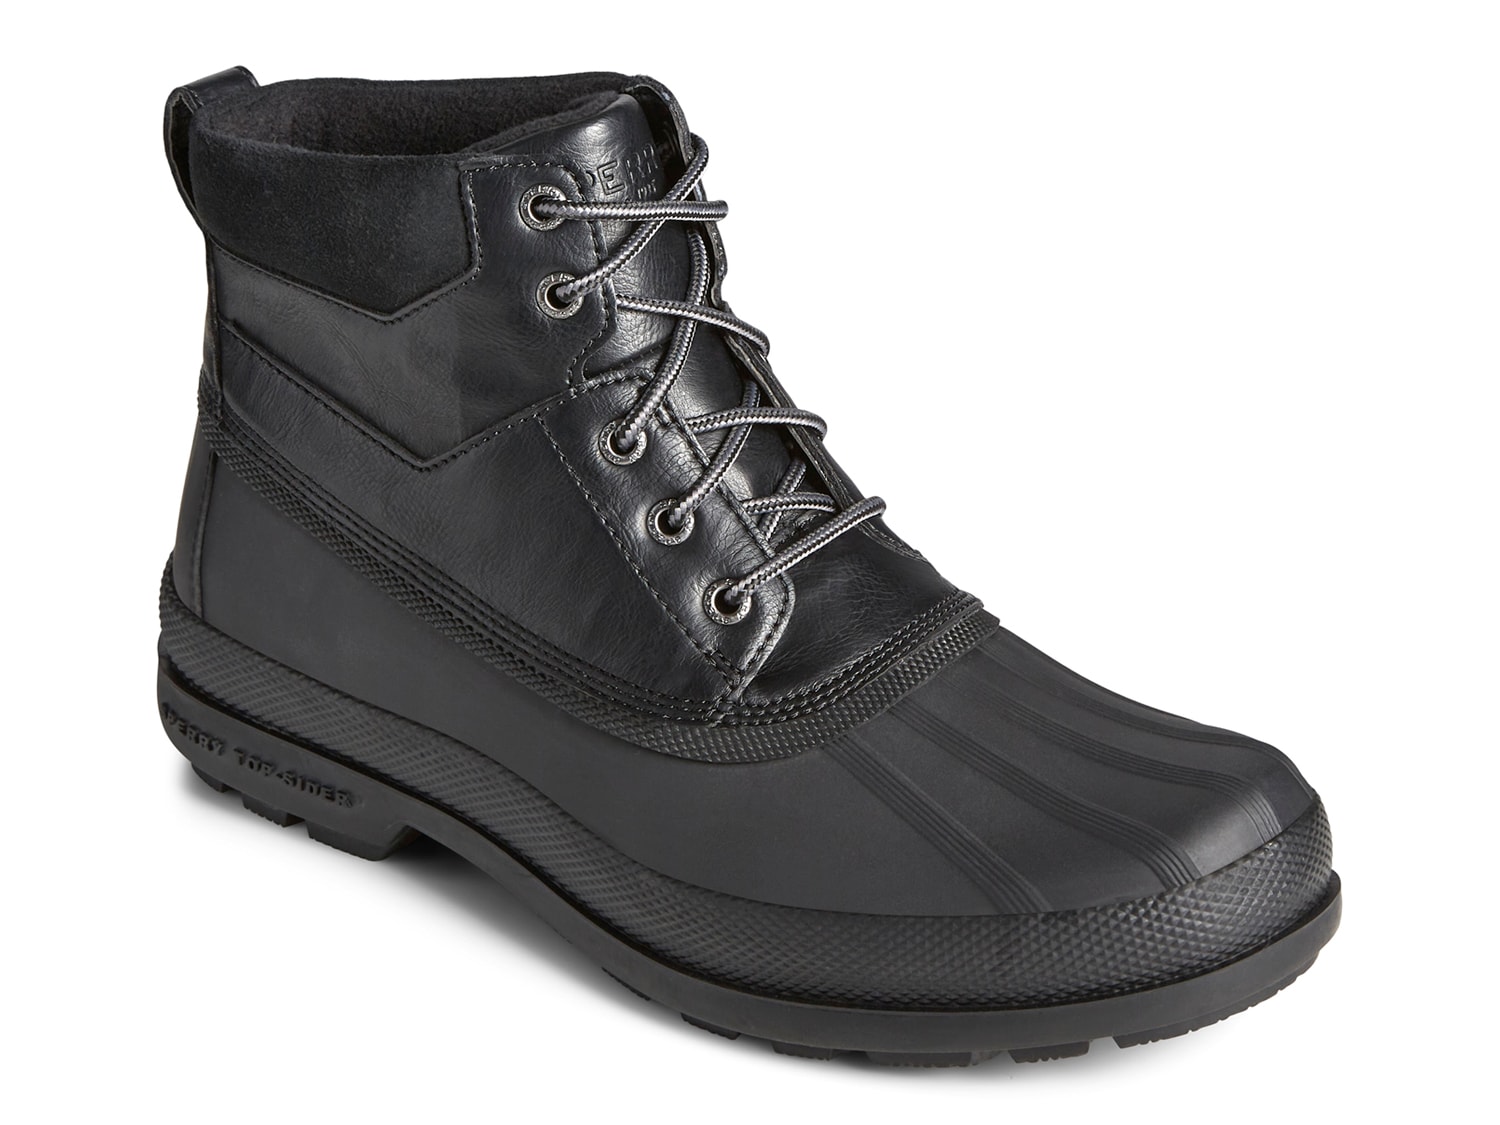 Sperry Cold Bay Chukka Duck Boot - Free Shipping | DSW